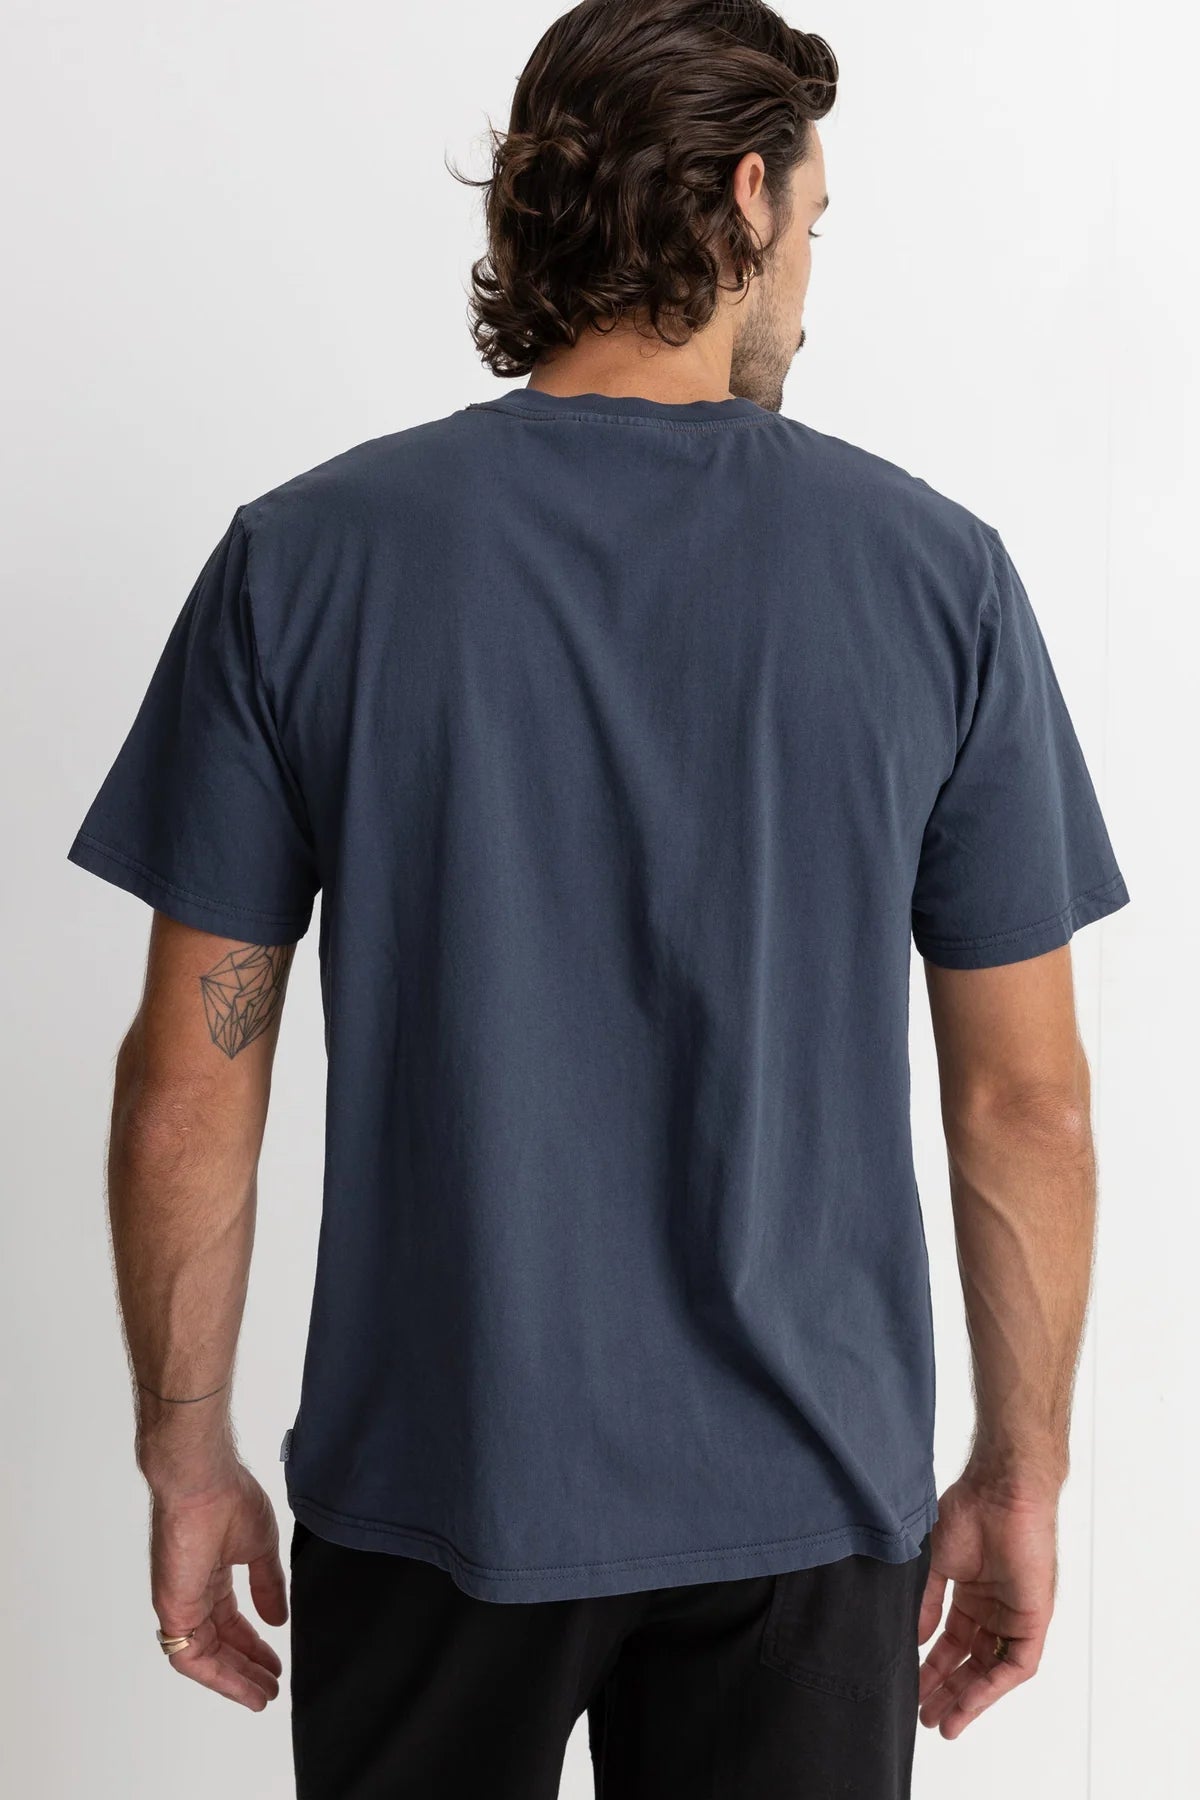 Back view of men's navy colored short sleeve tshirt